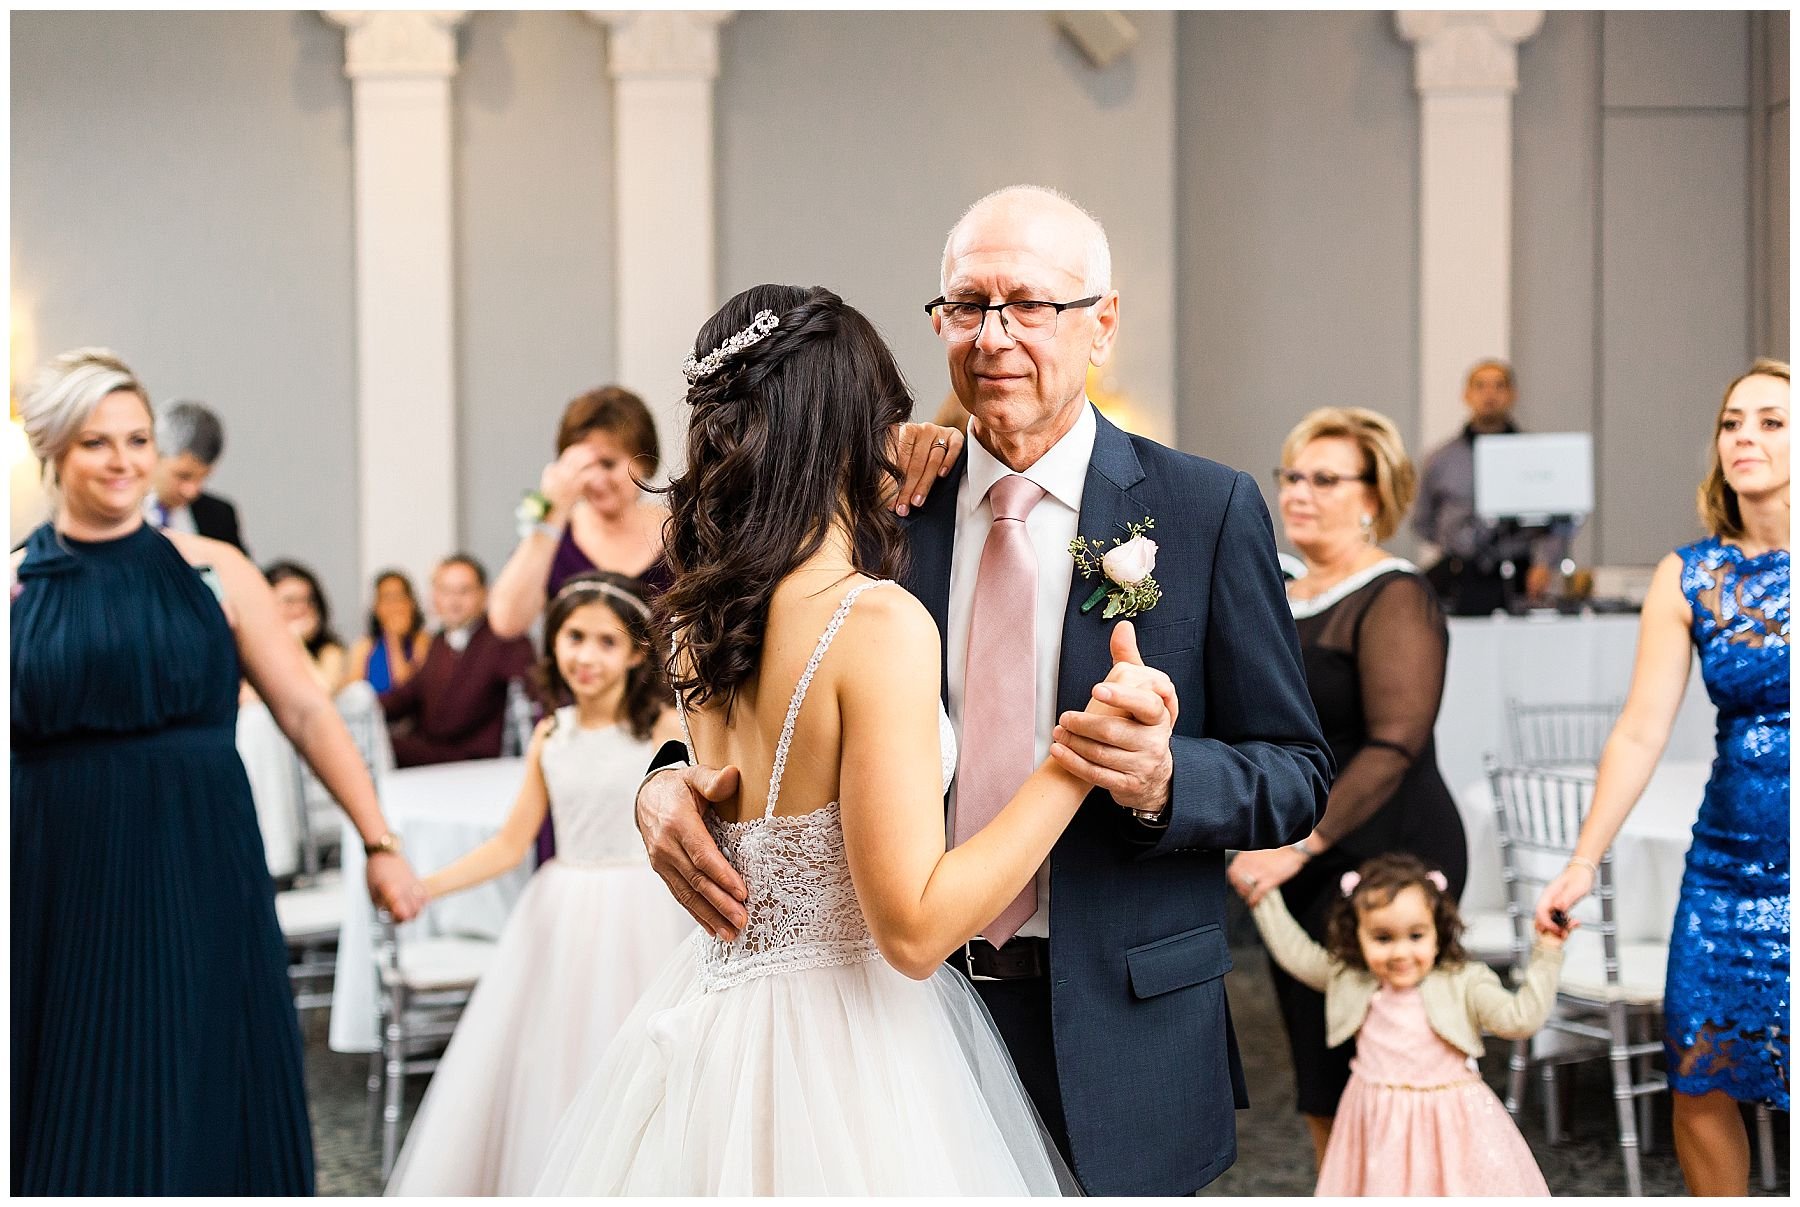 Father daughter dance at Italian wedding